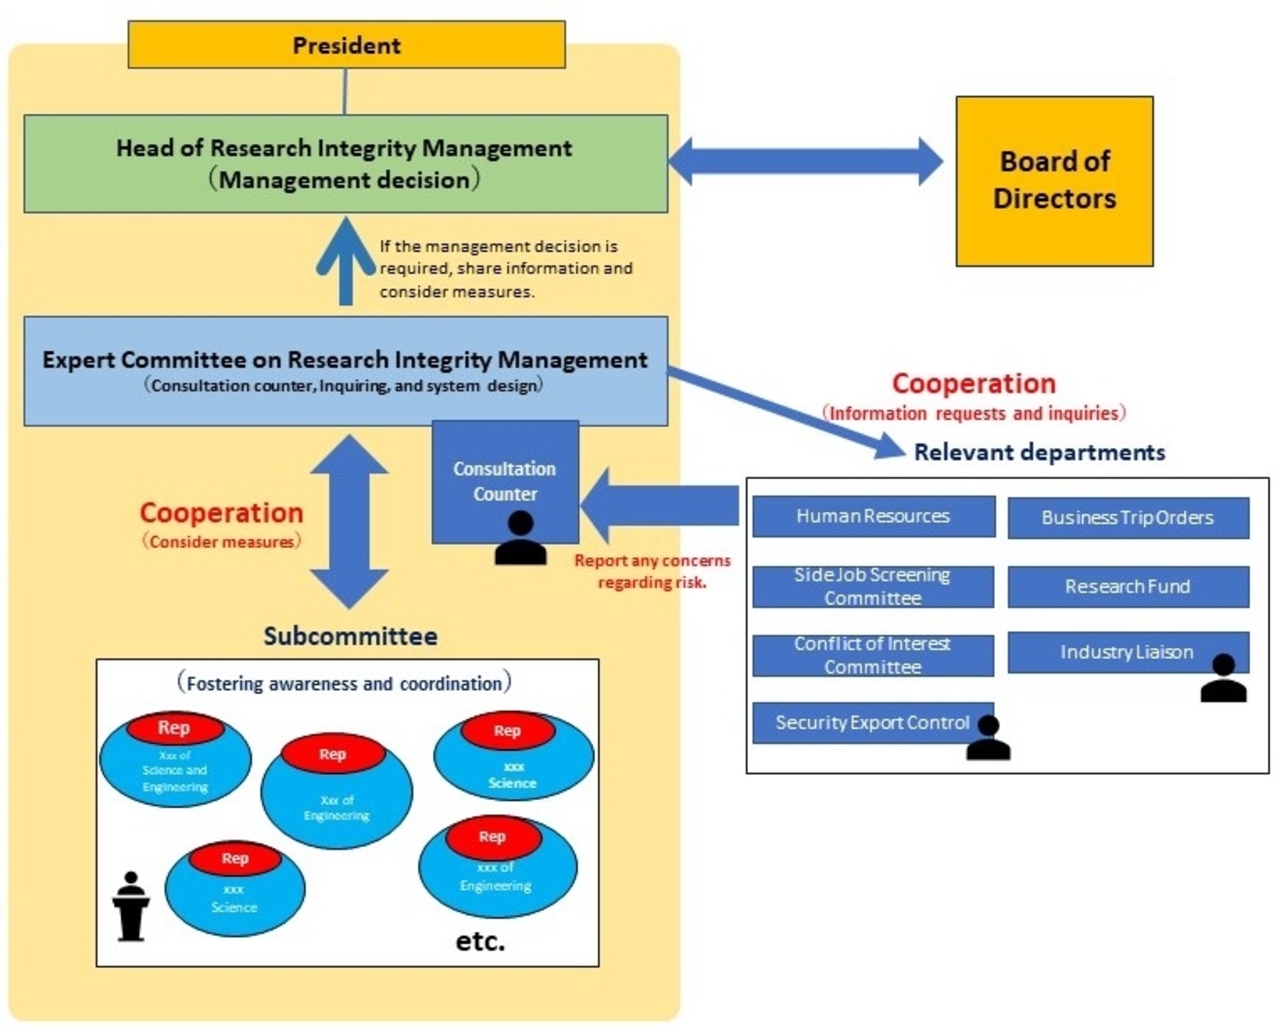 Research Integrity Management System at Tokyo Tech